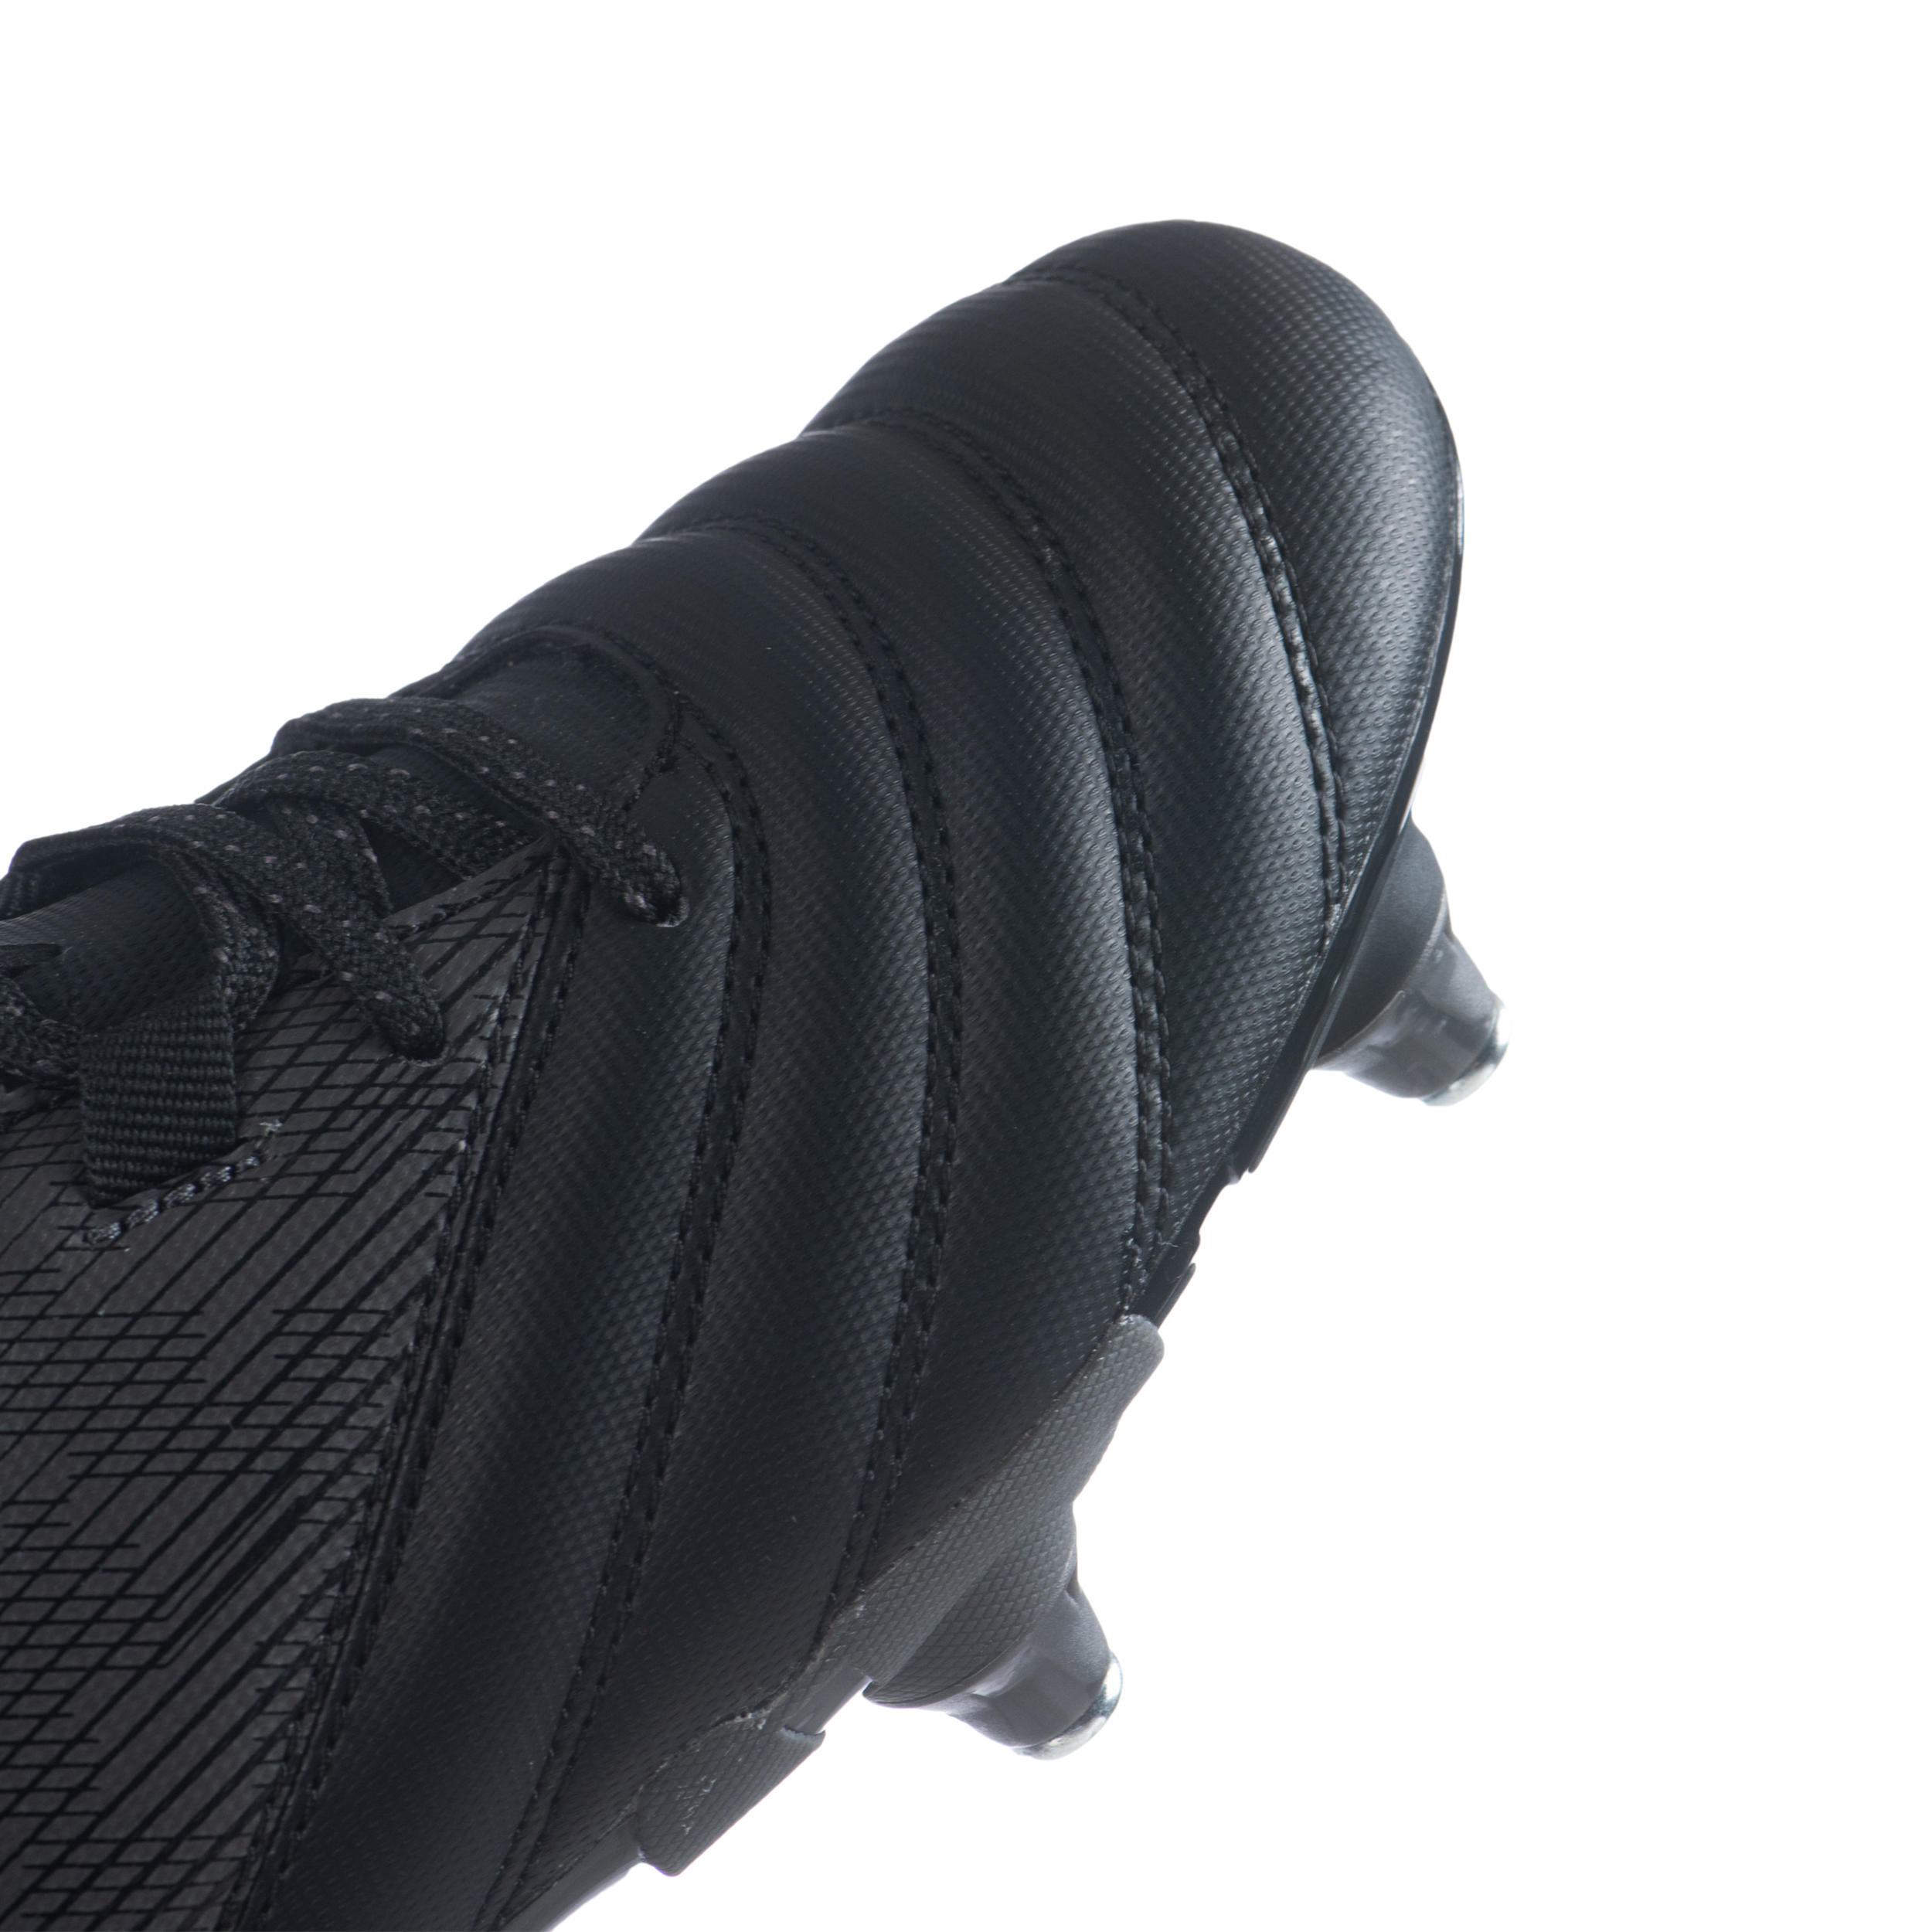 Kids' Soft Ground Studded Rugby Boots R500 SG - Black 5/7